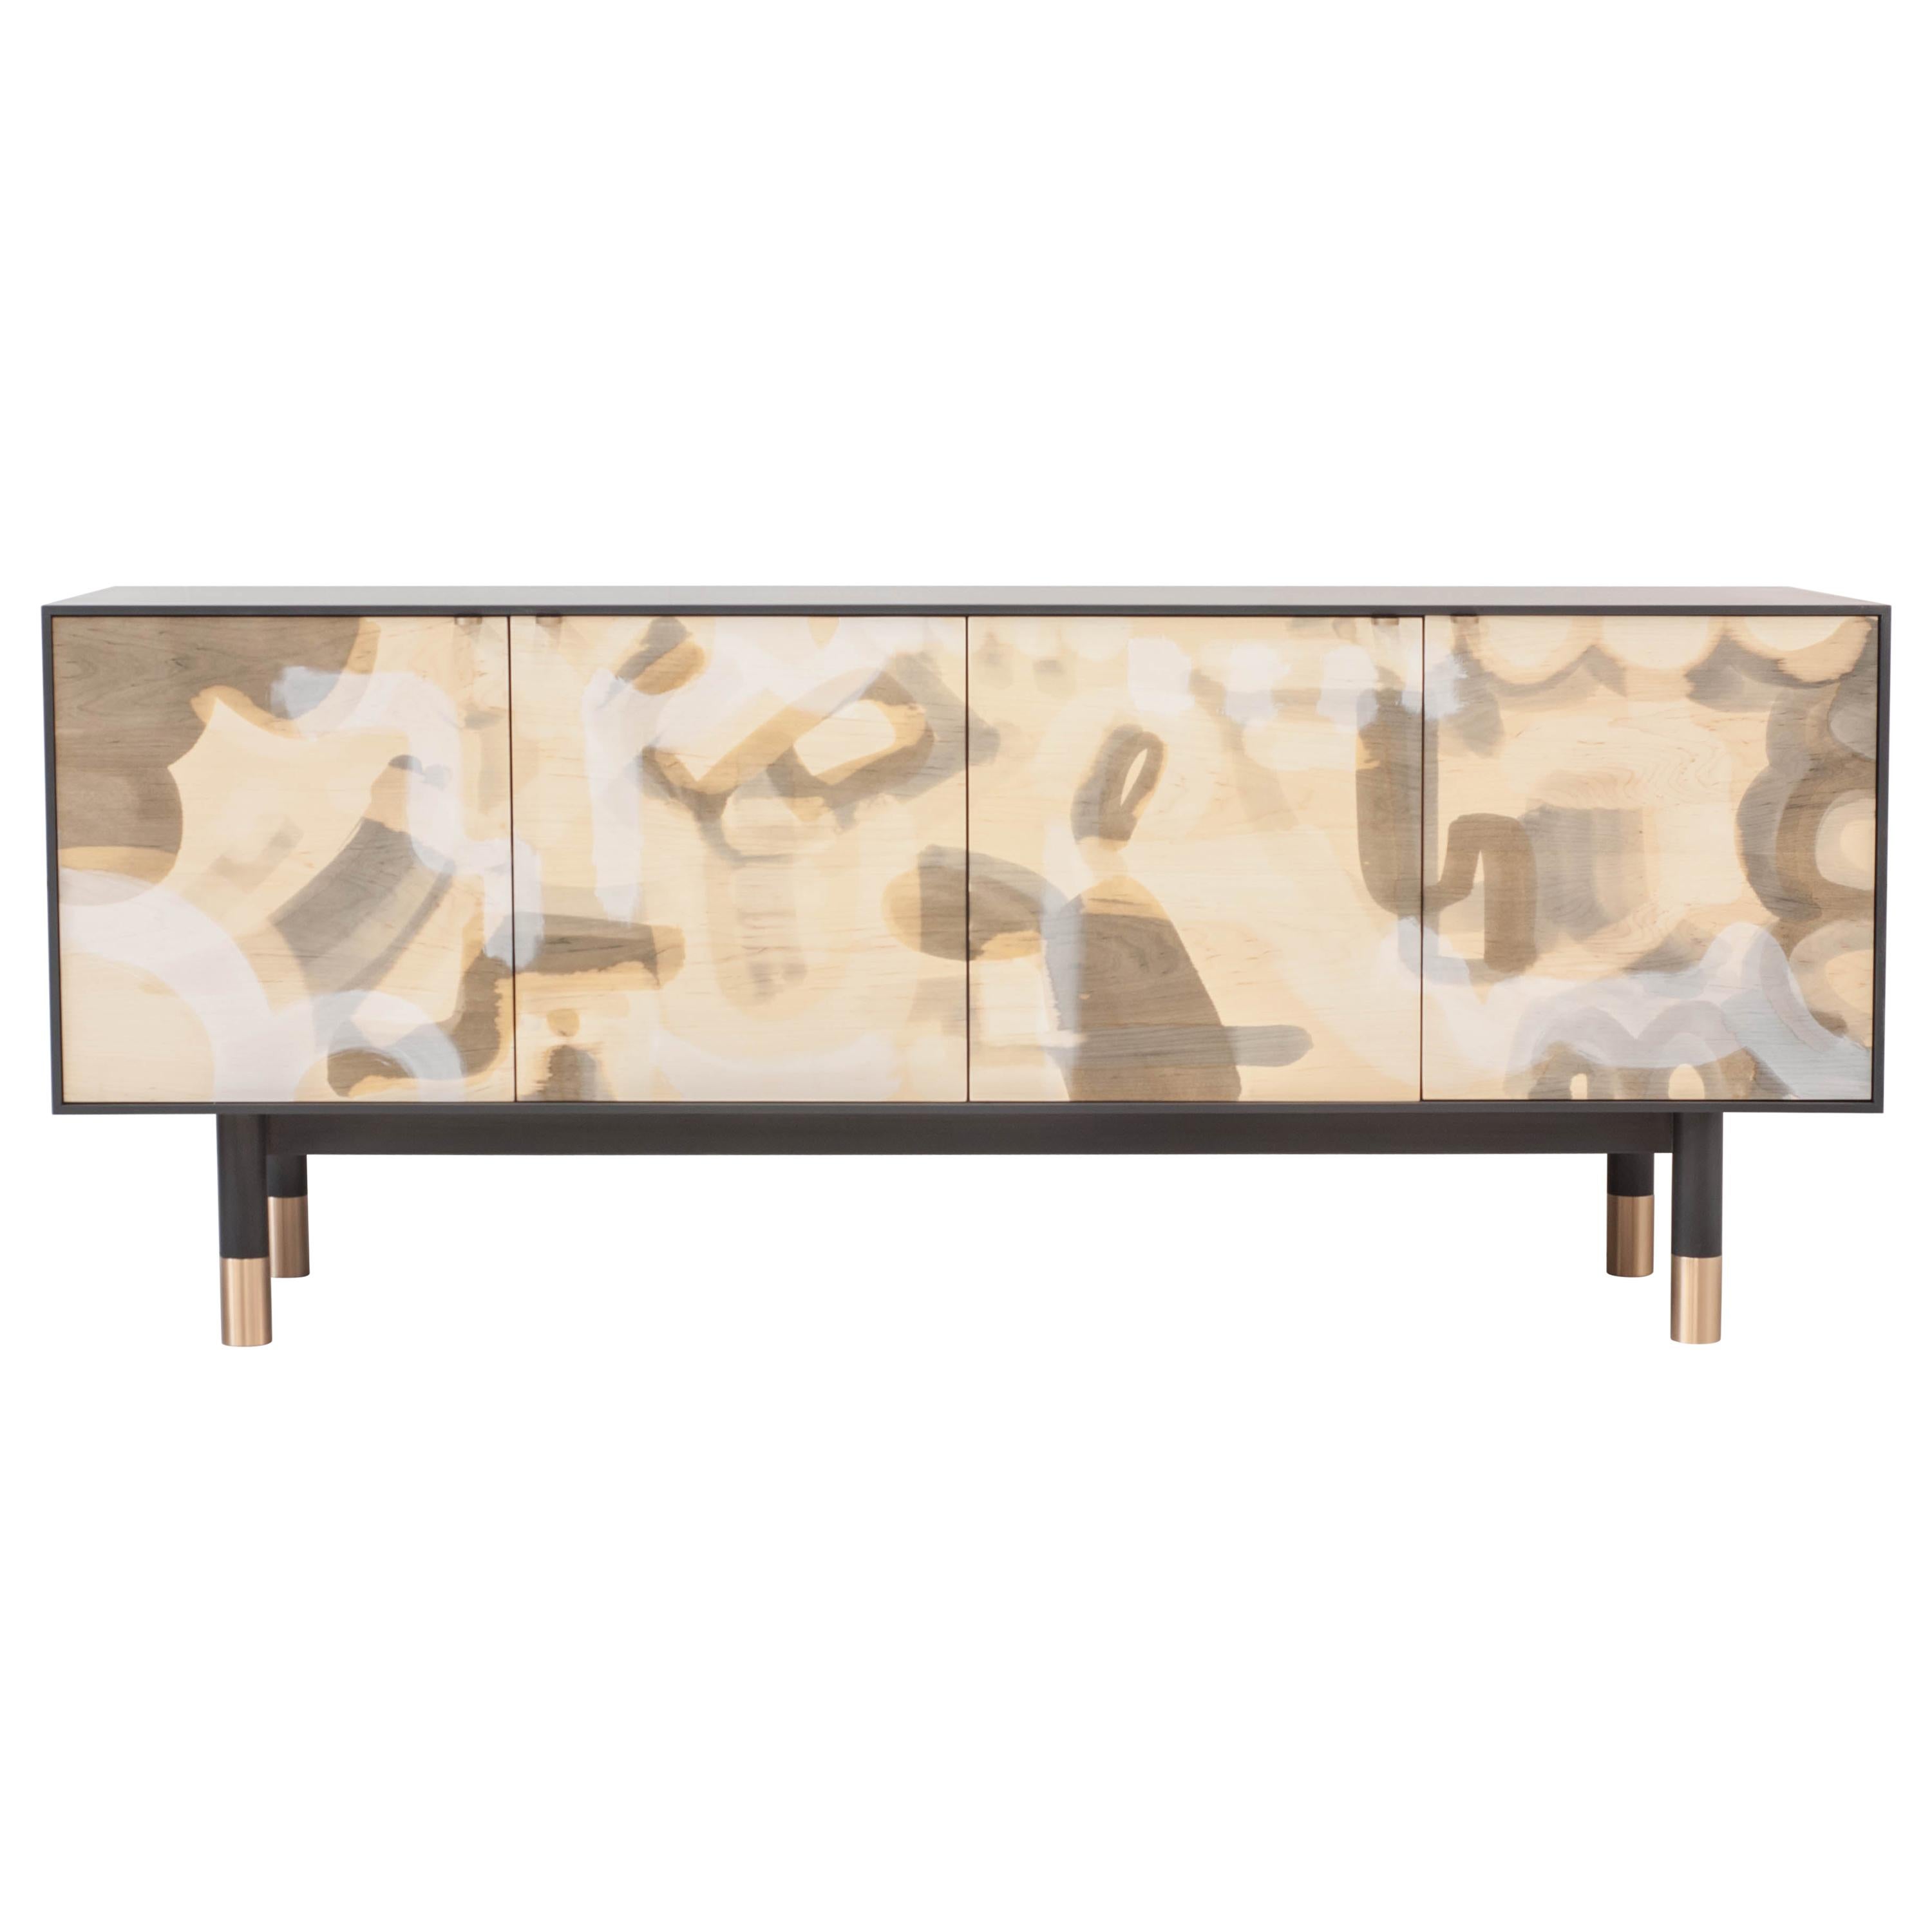 Painted Credenza, with Bronze Legs